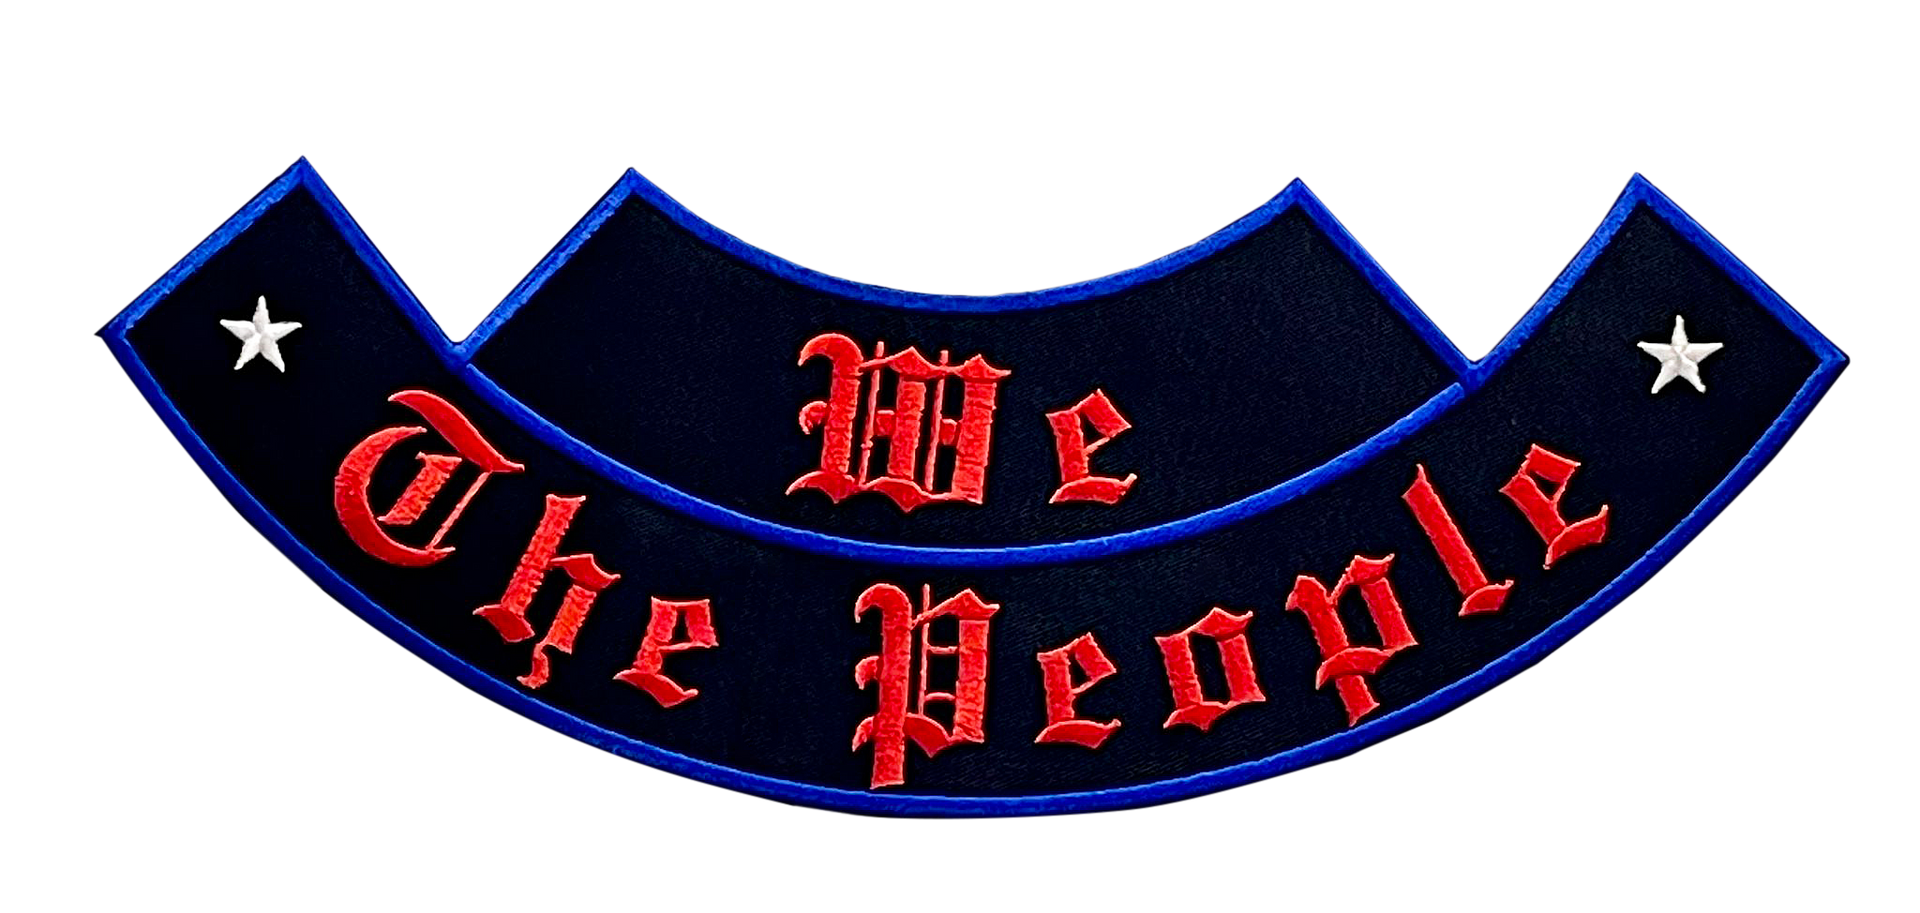 A patch that says we the people on it